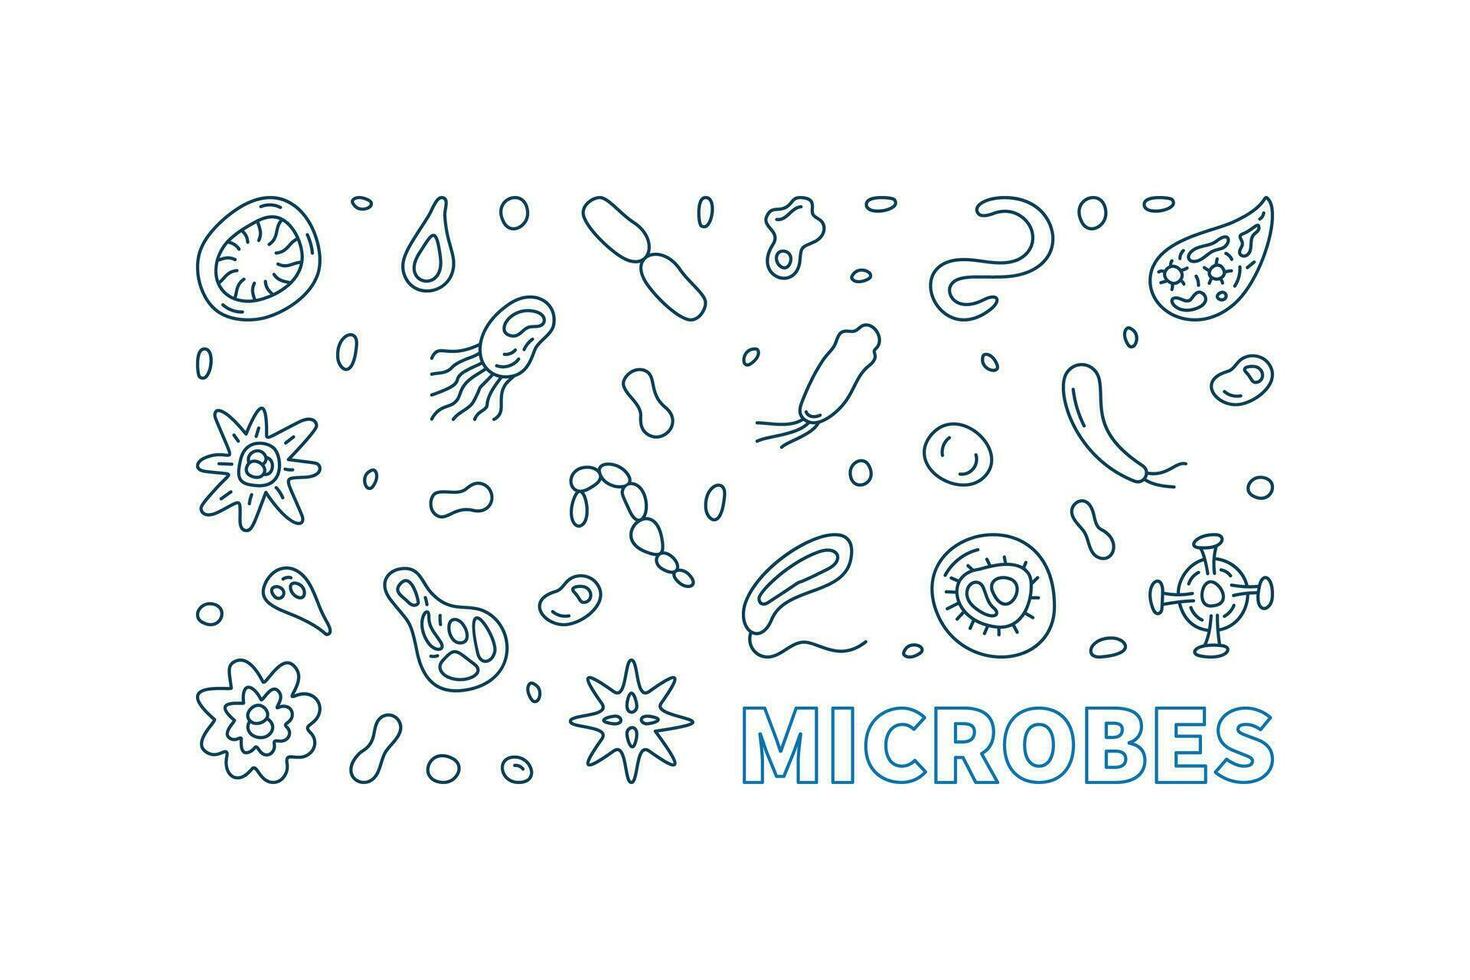 Microbes vector Micro Biology concept outline minimal horizontal banner or illustration